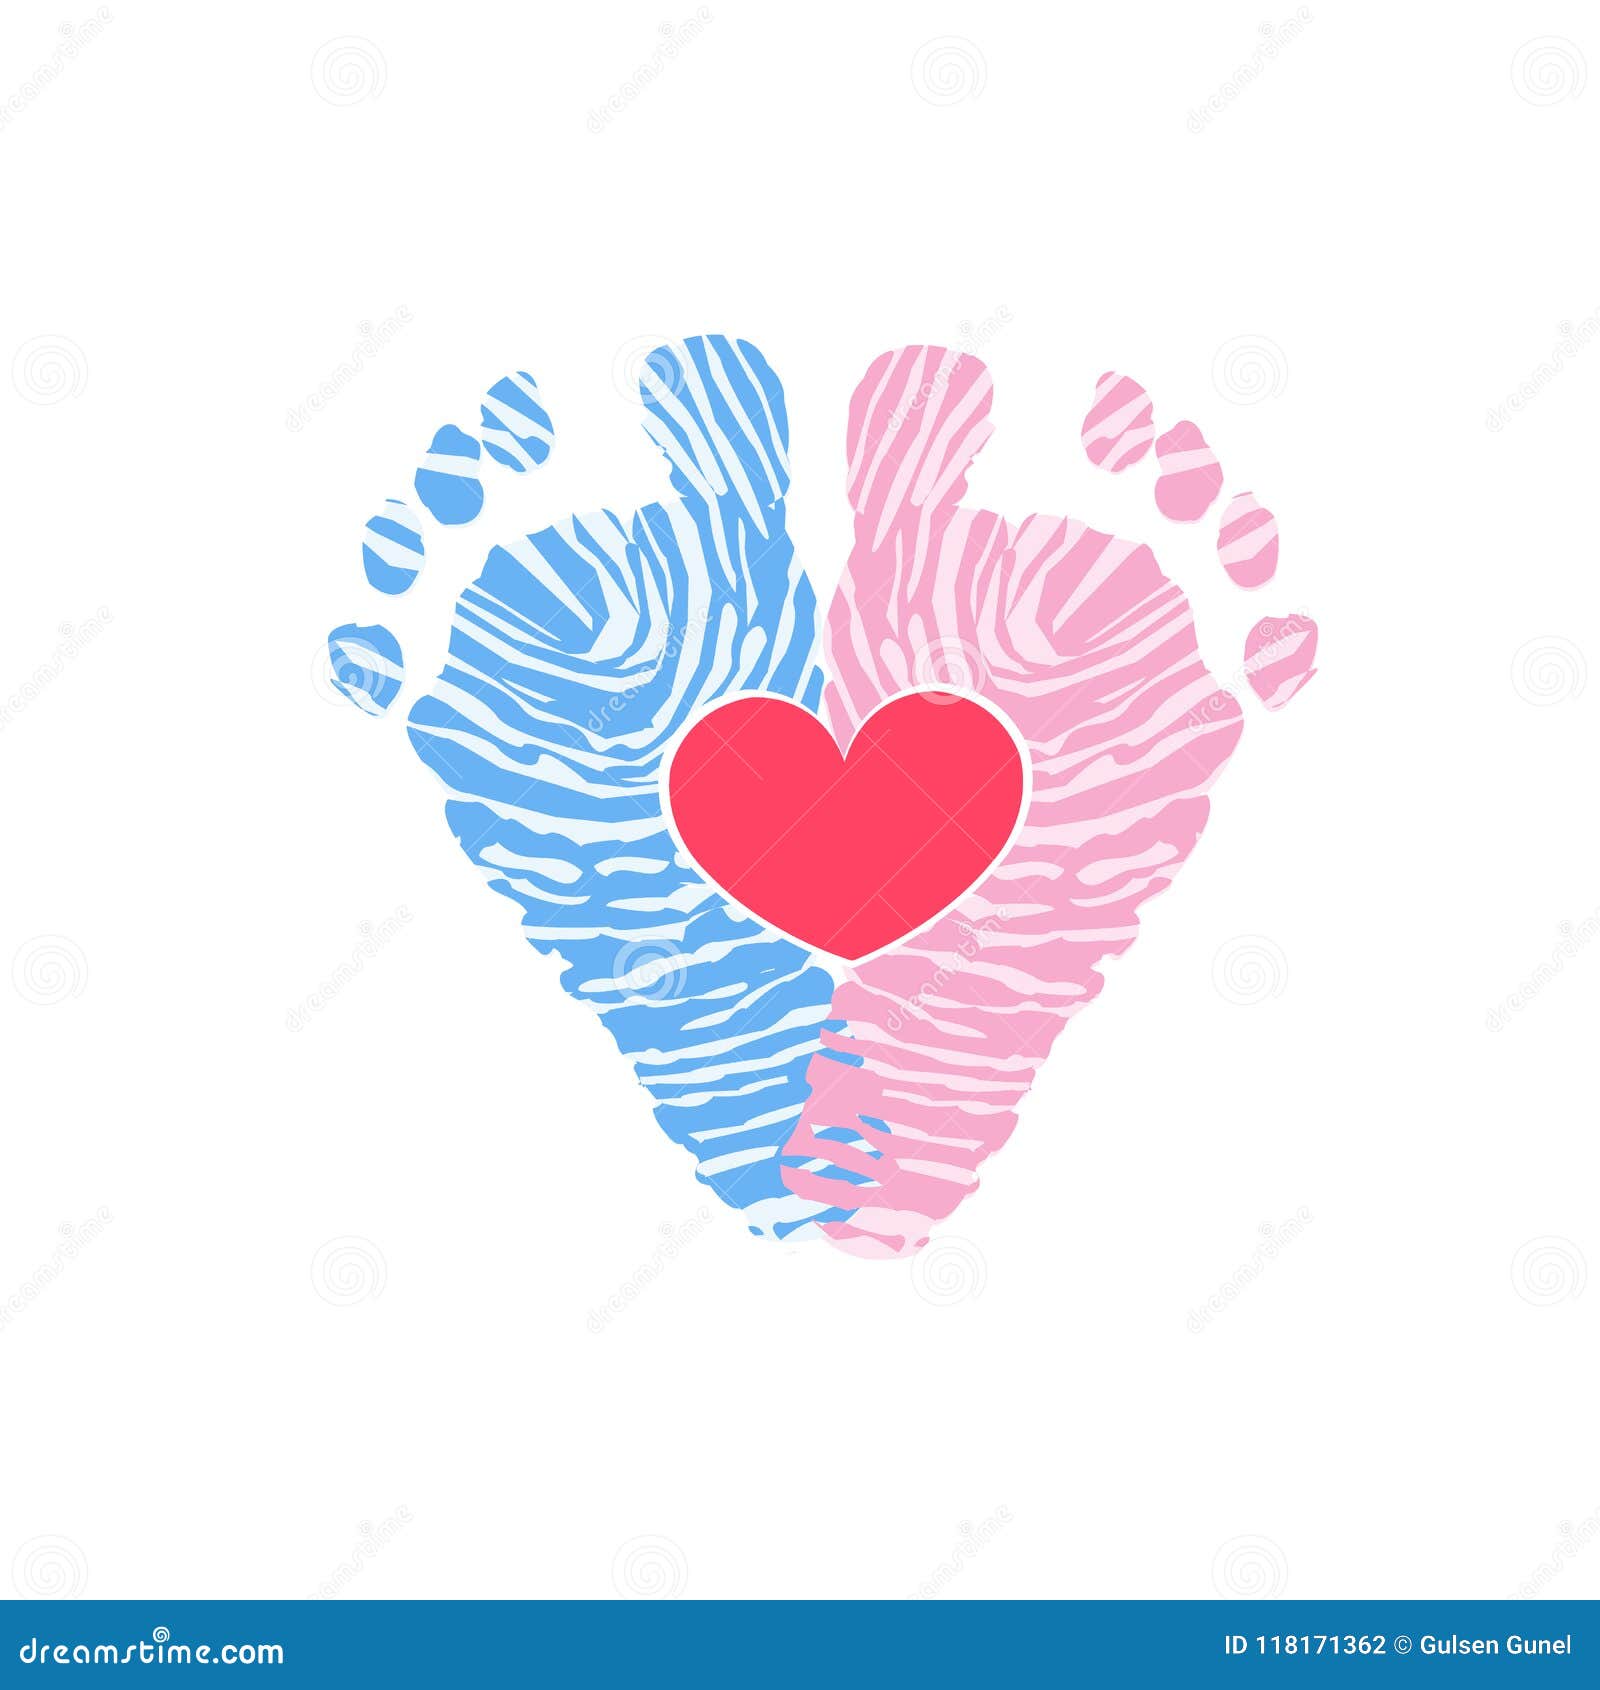 foot steps. baby girl. baby boy. twin baby icon. baby gender reveal. baby foot print made of finger prints